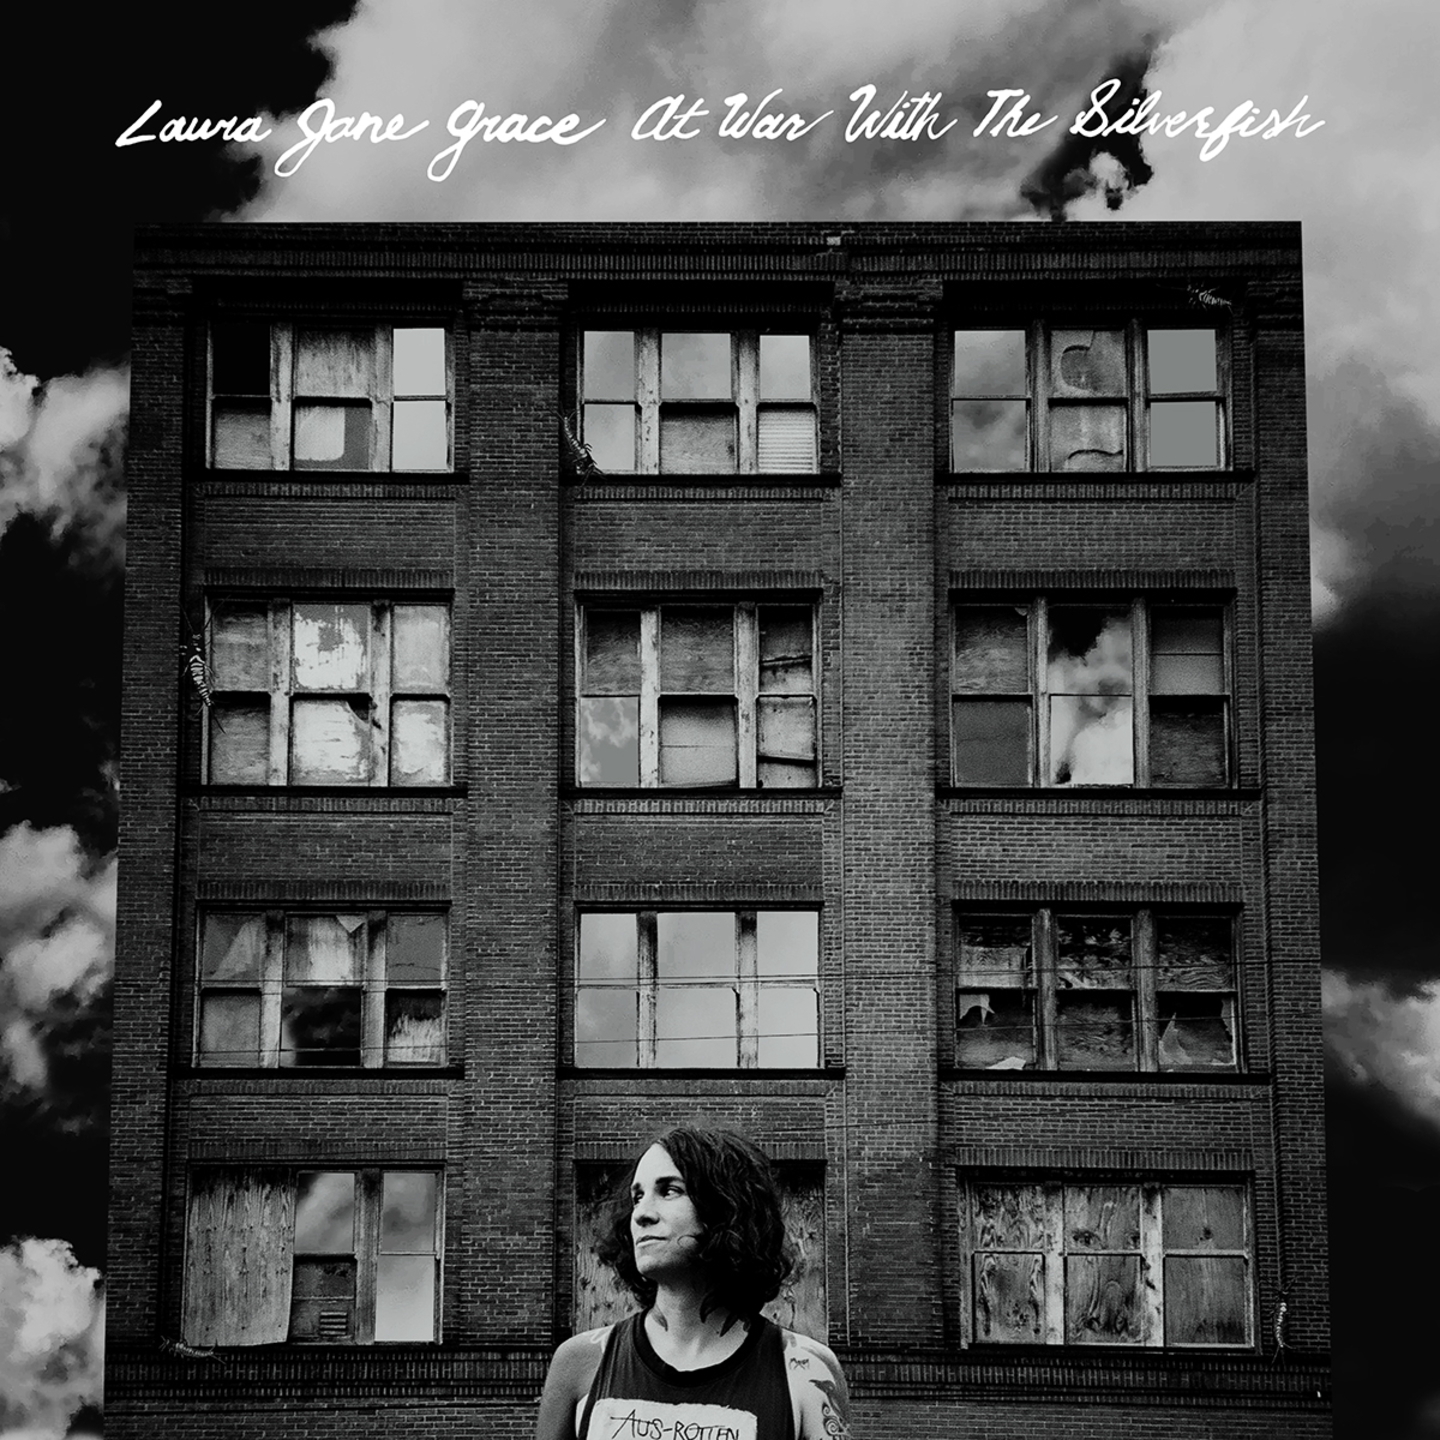 LAURA JANE GRACE - At War With The Silverfish 10 Crystal Clear Vinyl